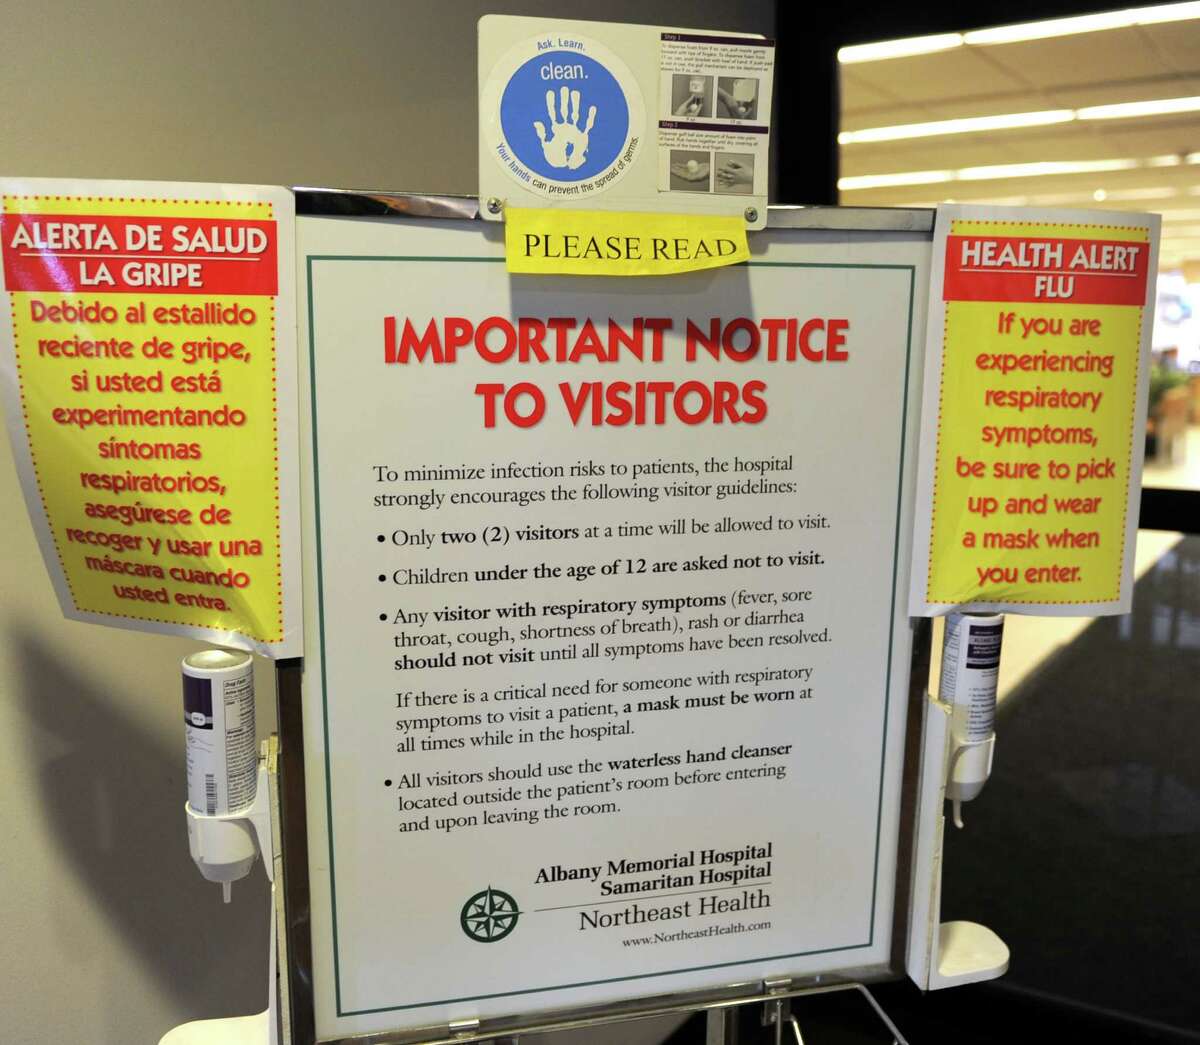 2014 file shot showing flu alert signs placed at the front doors of Albany Memorial Hospital on Thursday, Jan. 16, 2014 in Albany, N.Y. Capital Region hospitals have put visitor restrictions in place, following state Health Commissioner Howard Zucker?s declaration last week that influenza is prevalent statewide. (Lori Van Buren / Times Union archive)